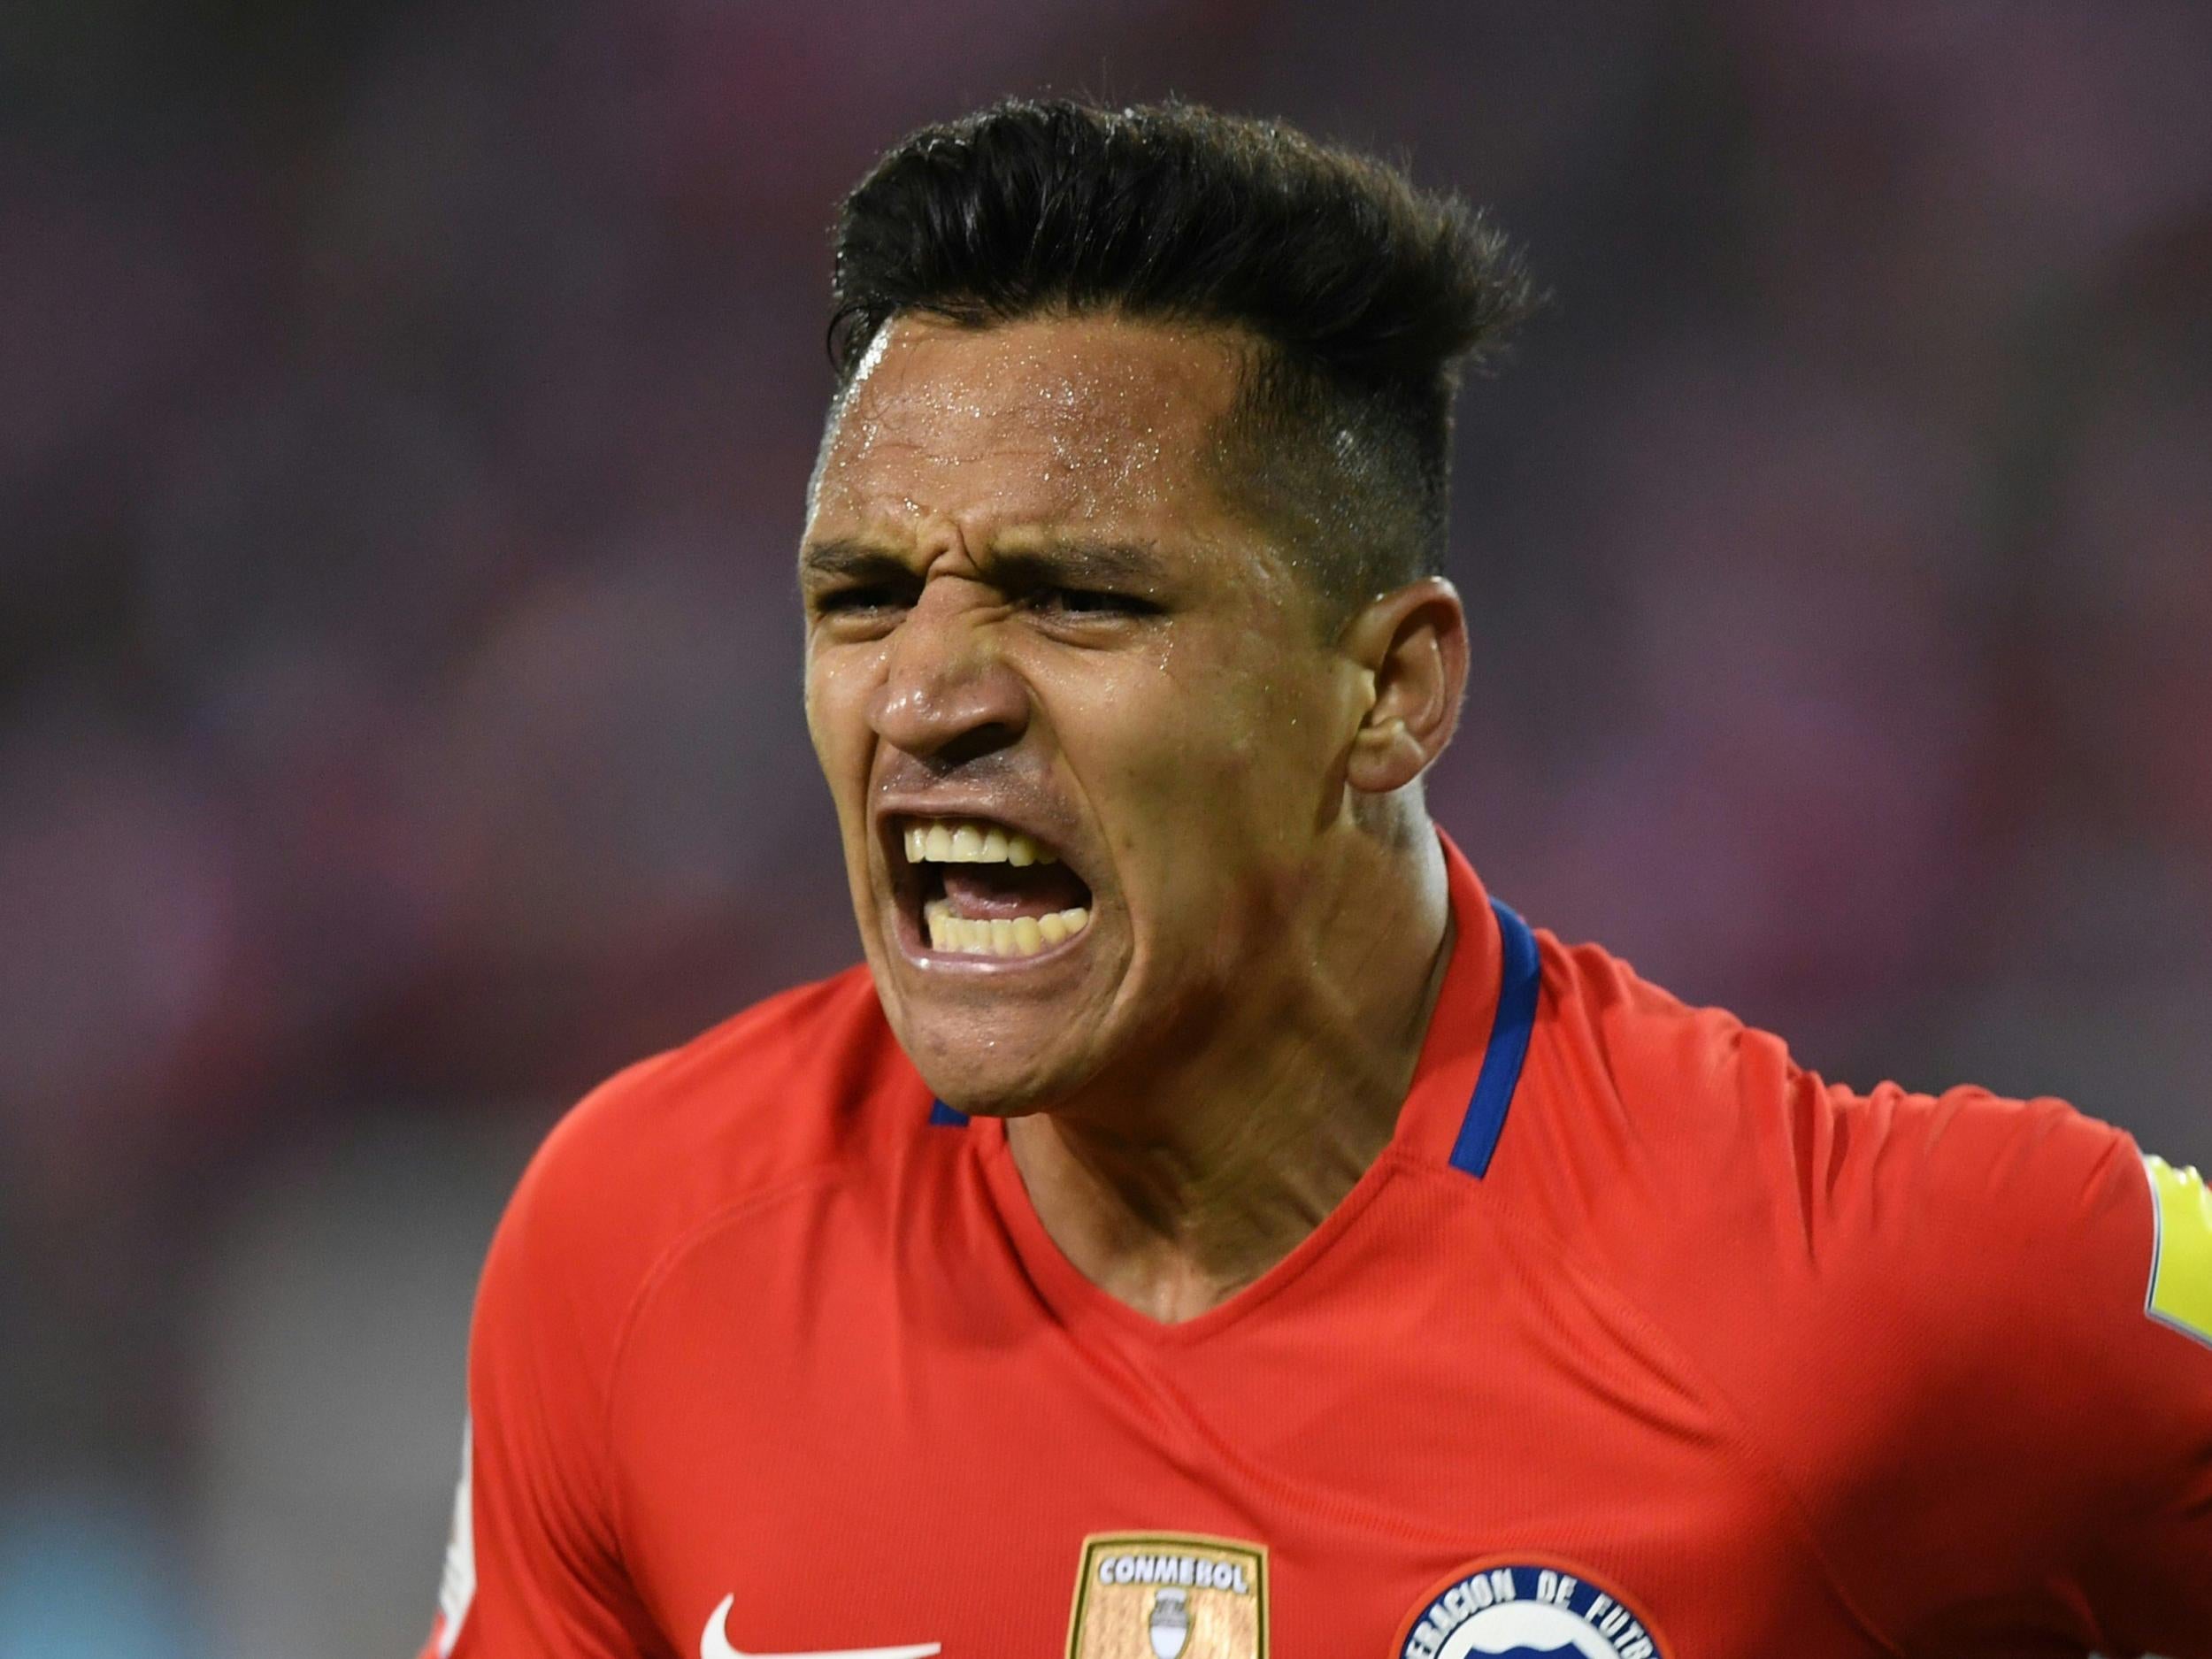 Alexis Sanchez has been away on international duty with Chile